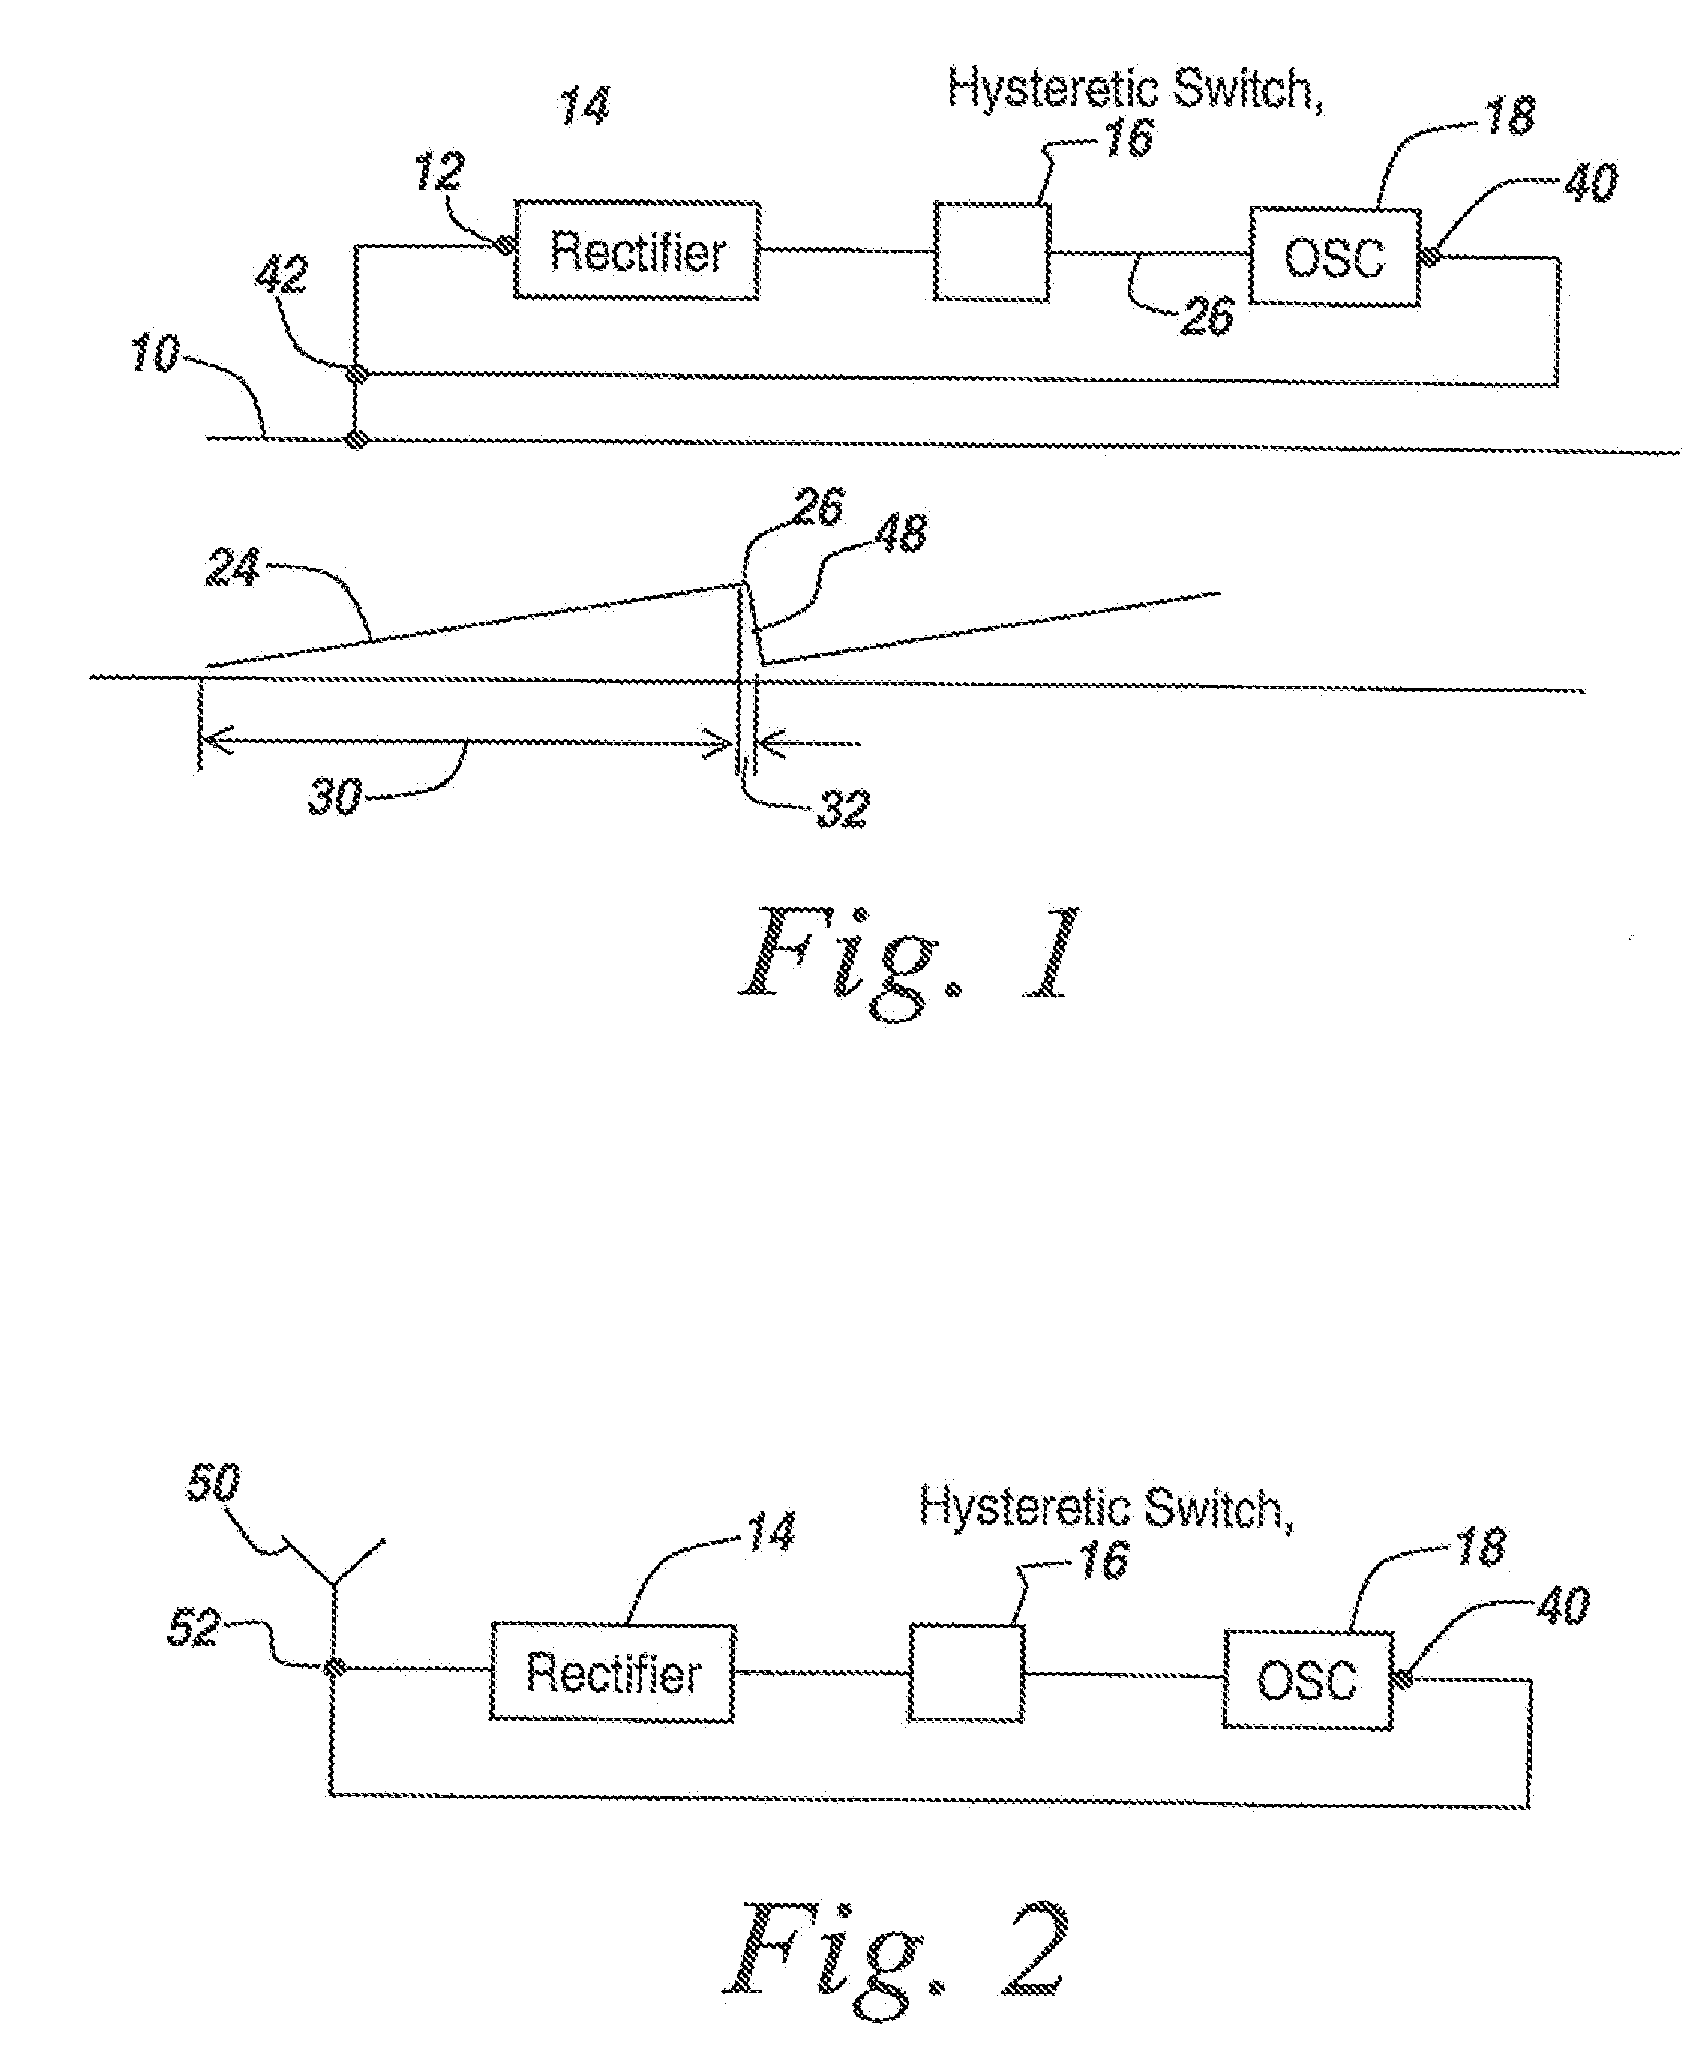 Method of determining conditions on the ground using microradios